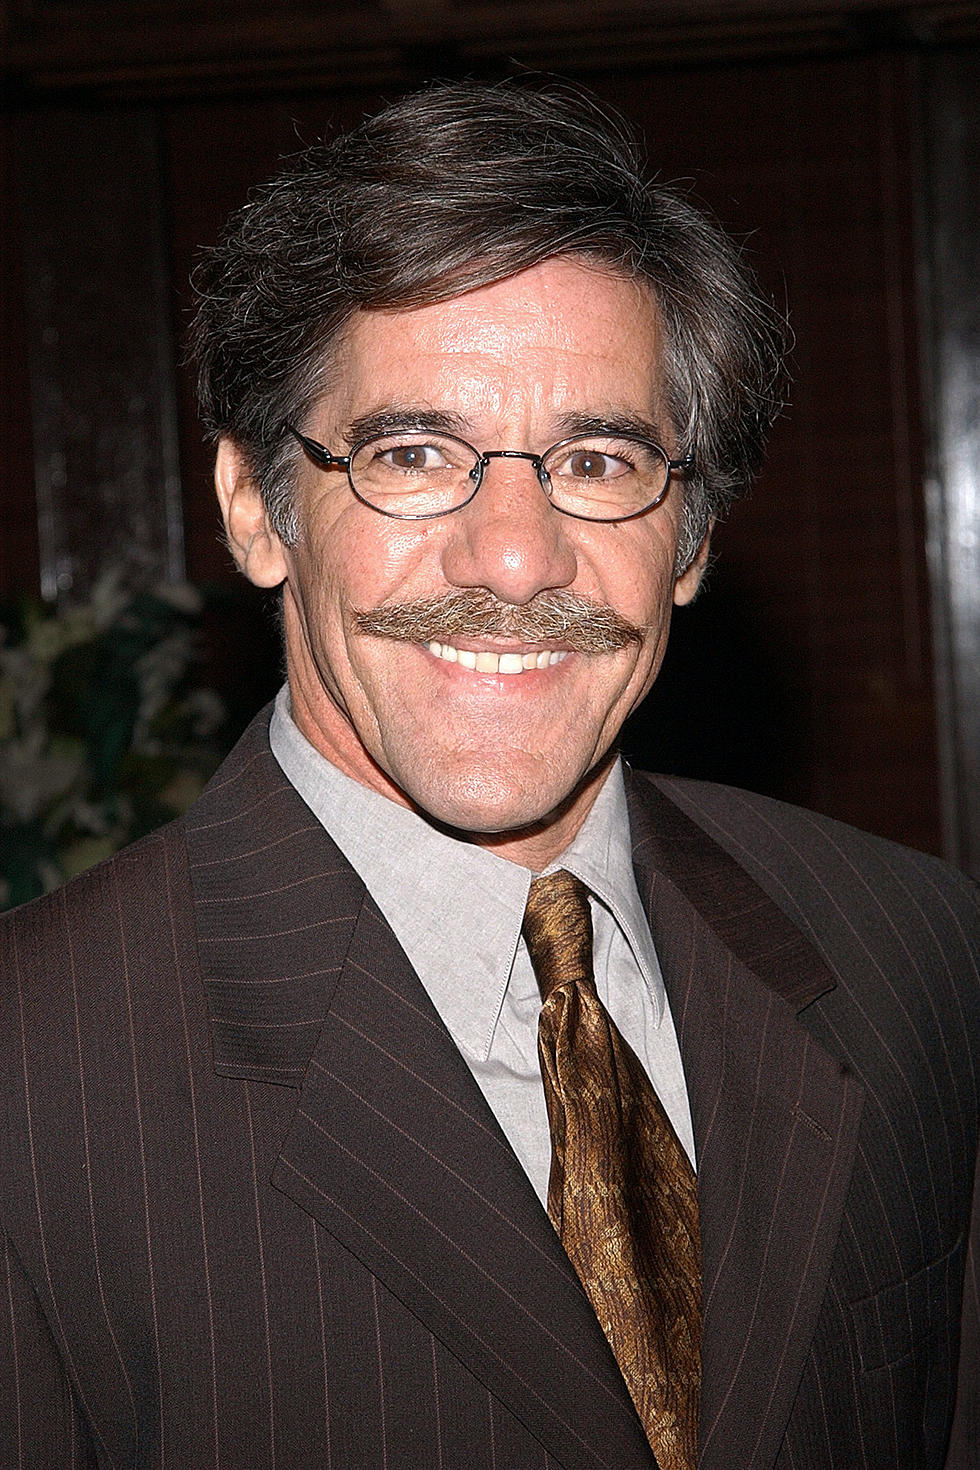 Deleted from His Twitter Account, But We Have It Here – Geraldo Rivera’s Semi Naked ‘Selfie’